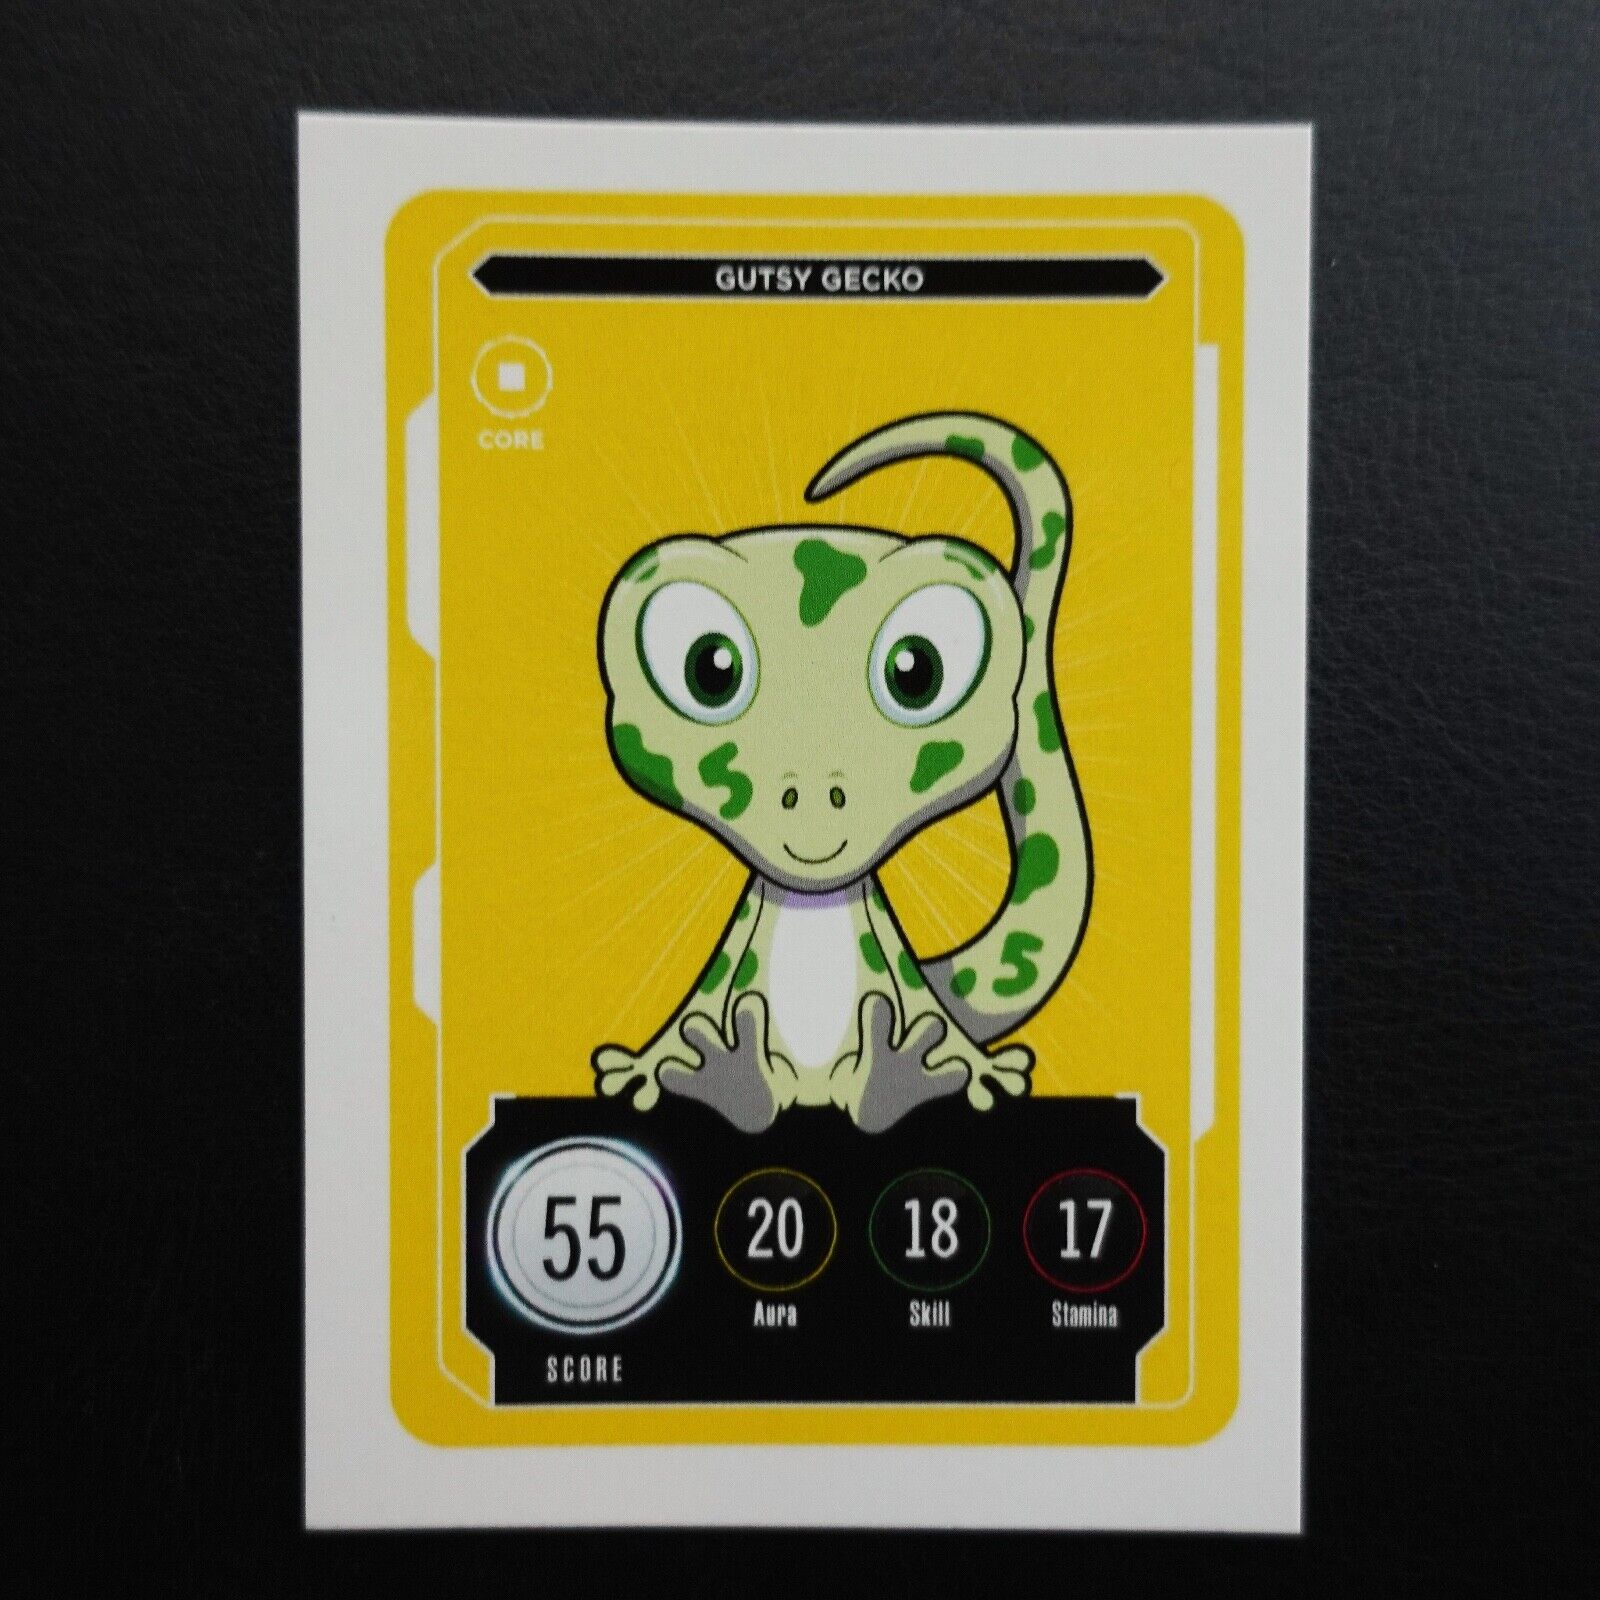 Gutsy Gecko Veefriends Compete And Collect Series 2 Trading Card Gary Vee